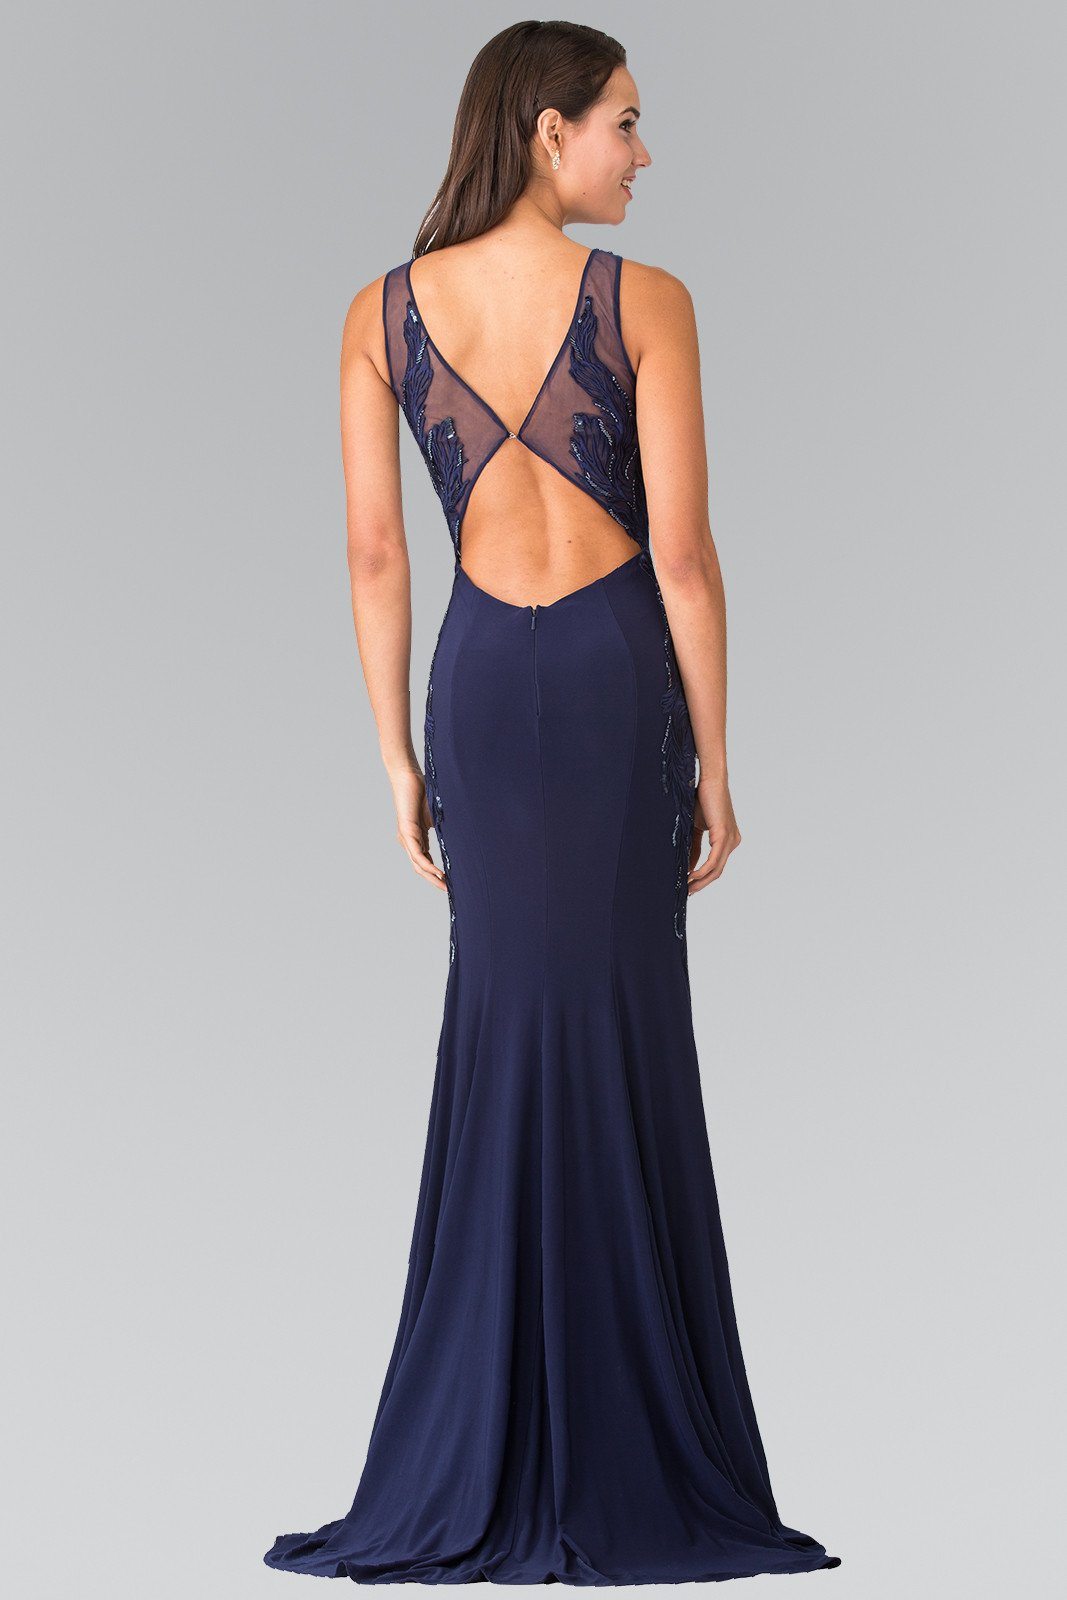 Long Open Back Dress with Side Embroidery by Elizabeth K GL2222-Long Formal Dresses-ABC Fashion